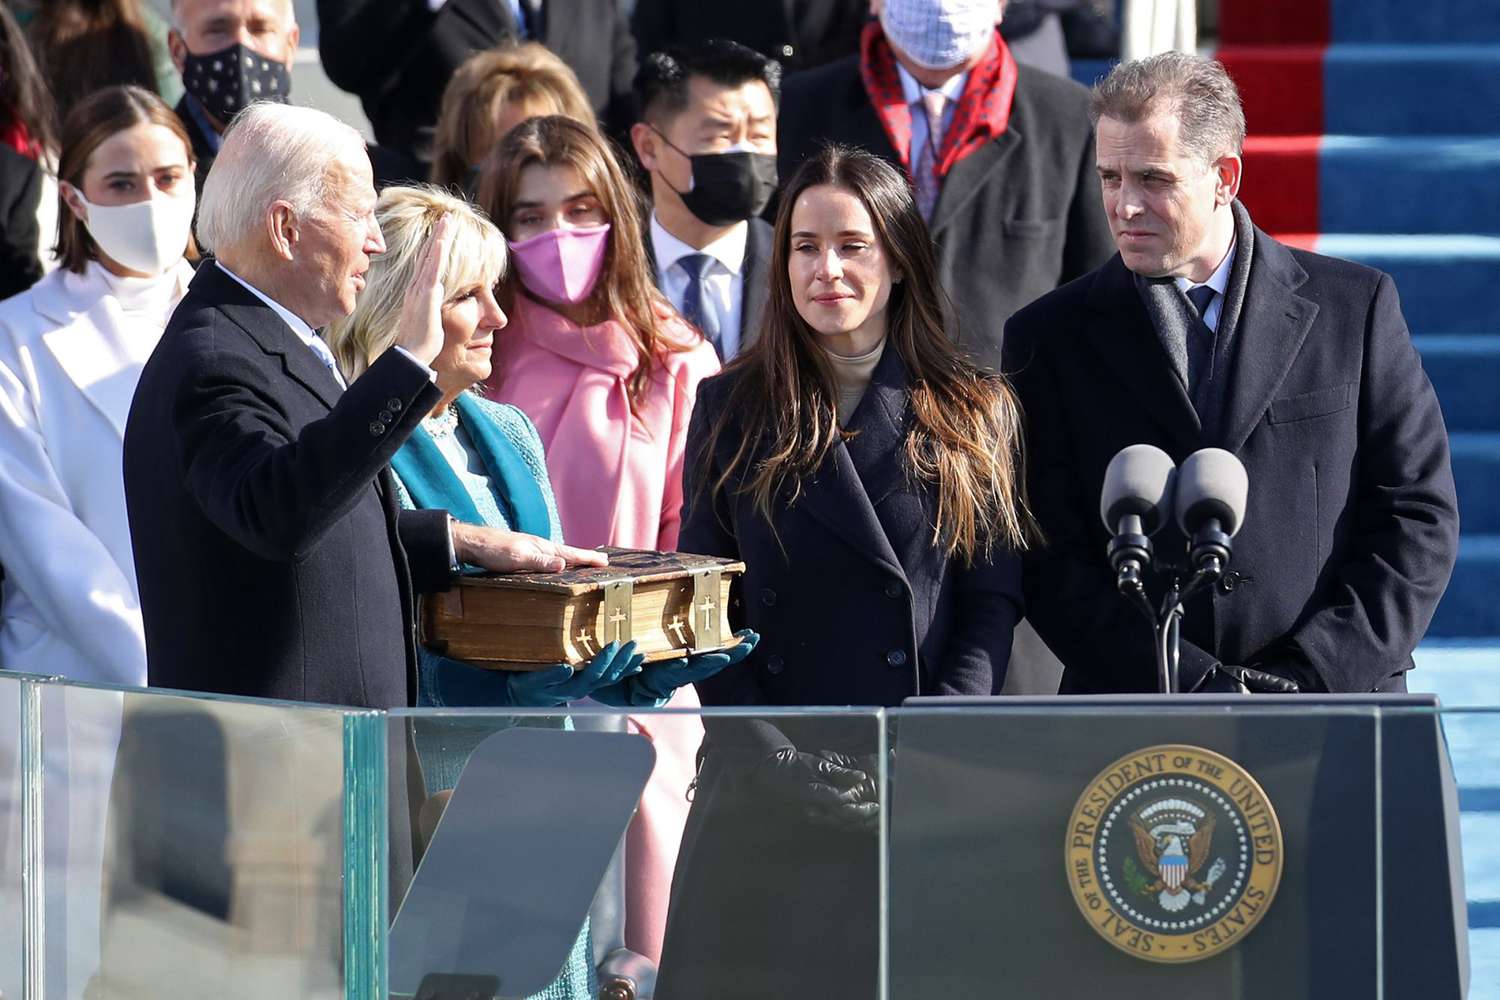 Joe Biden is sworn in as U.S. President as his wife Dr. Jill Biden looks on during his inauguration on the West Front of the U.S. Capitol on January 20, 2021 in Washington, DC